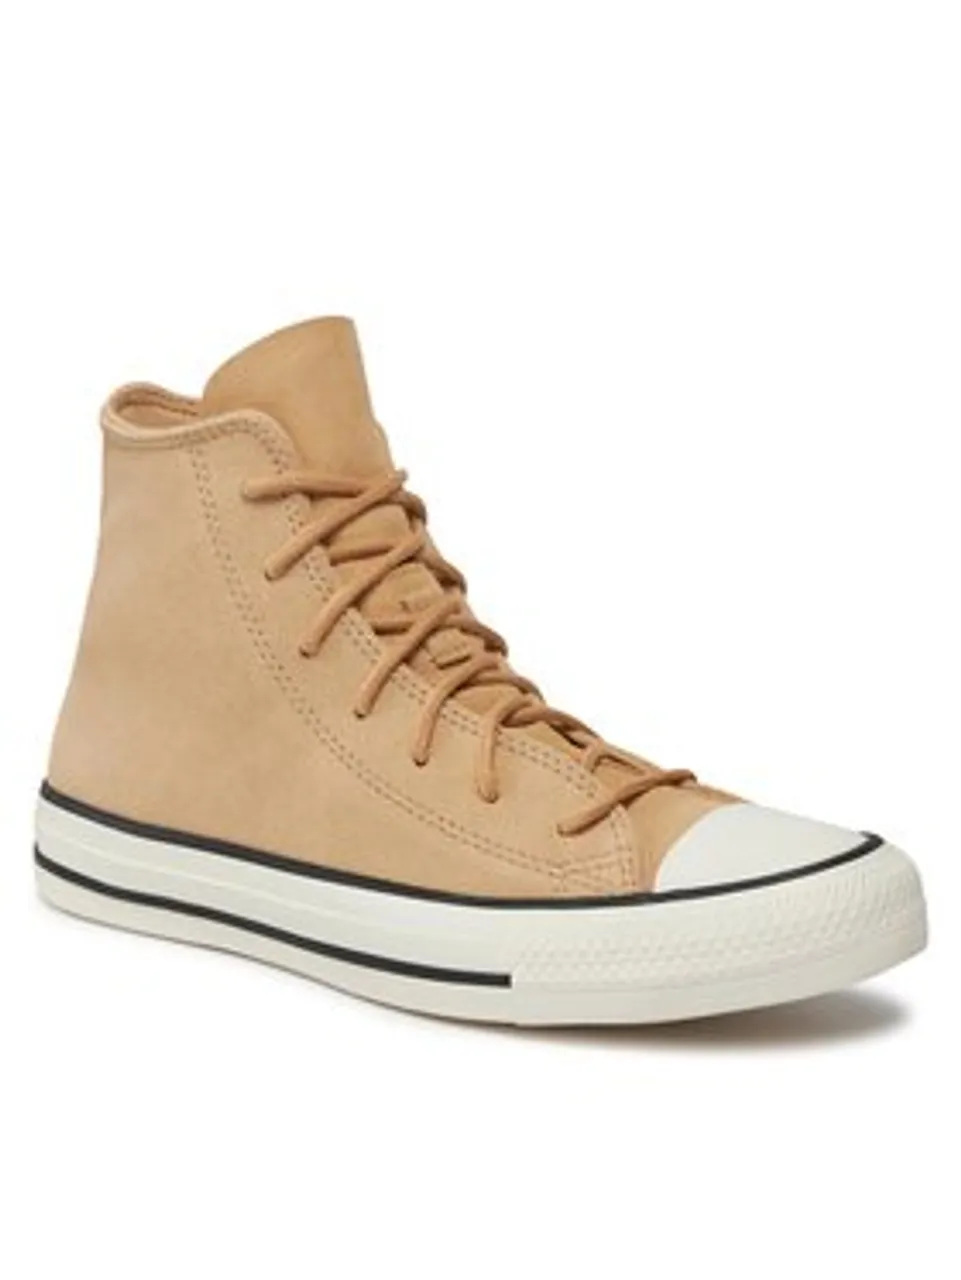 Converse Sneakers aus Stoff Chuck Taylor All Star A04636C Braun